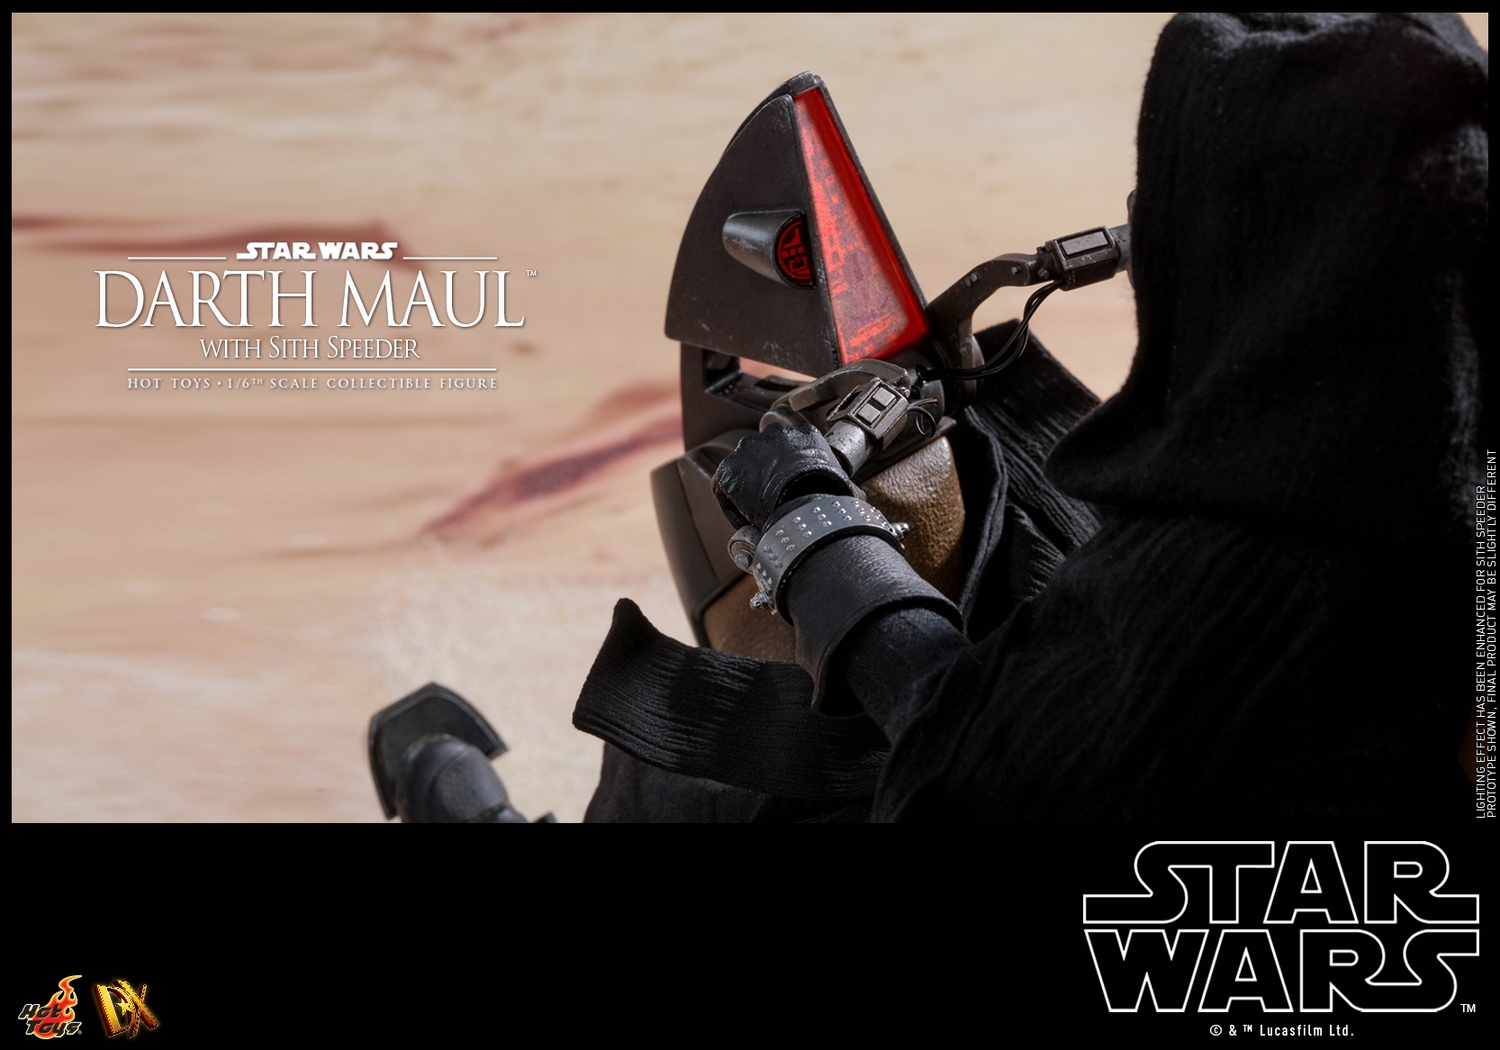 hot-toys-star-wars-1-6-darth-maul-with-sith-speeder-dx17-collectible-figure-028.jpg